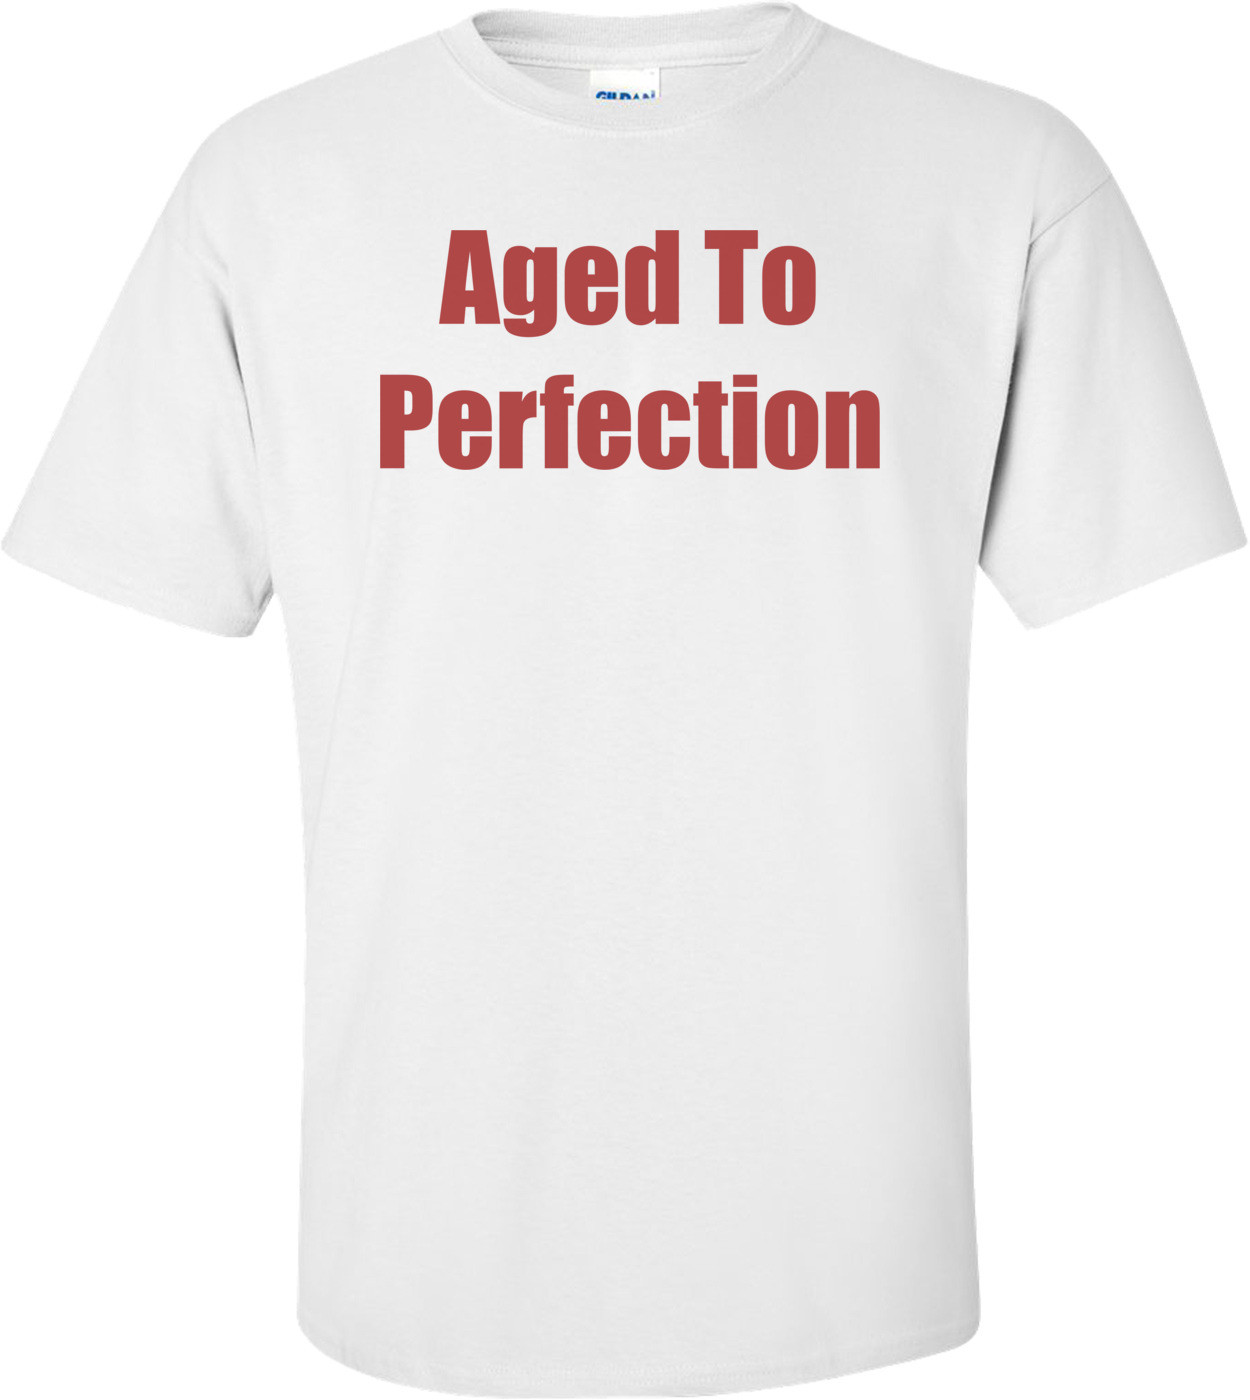 Aged To Perfection Shirt